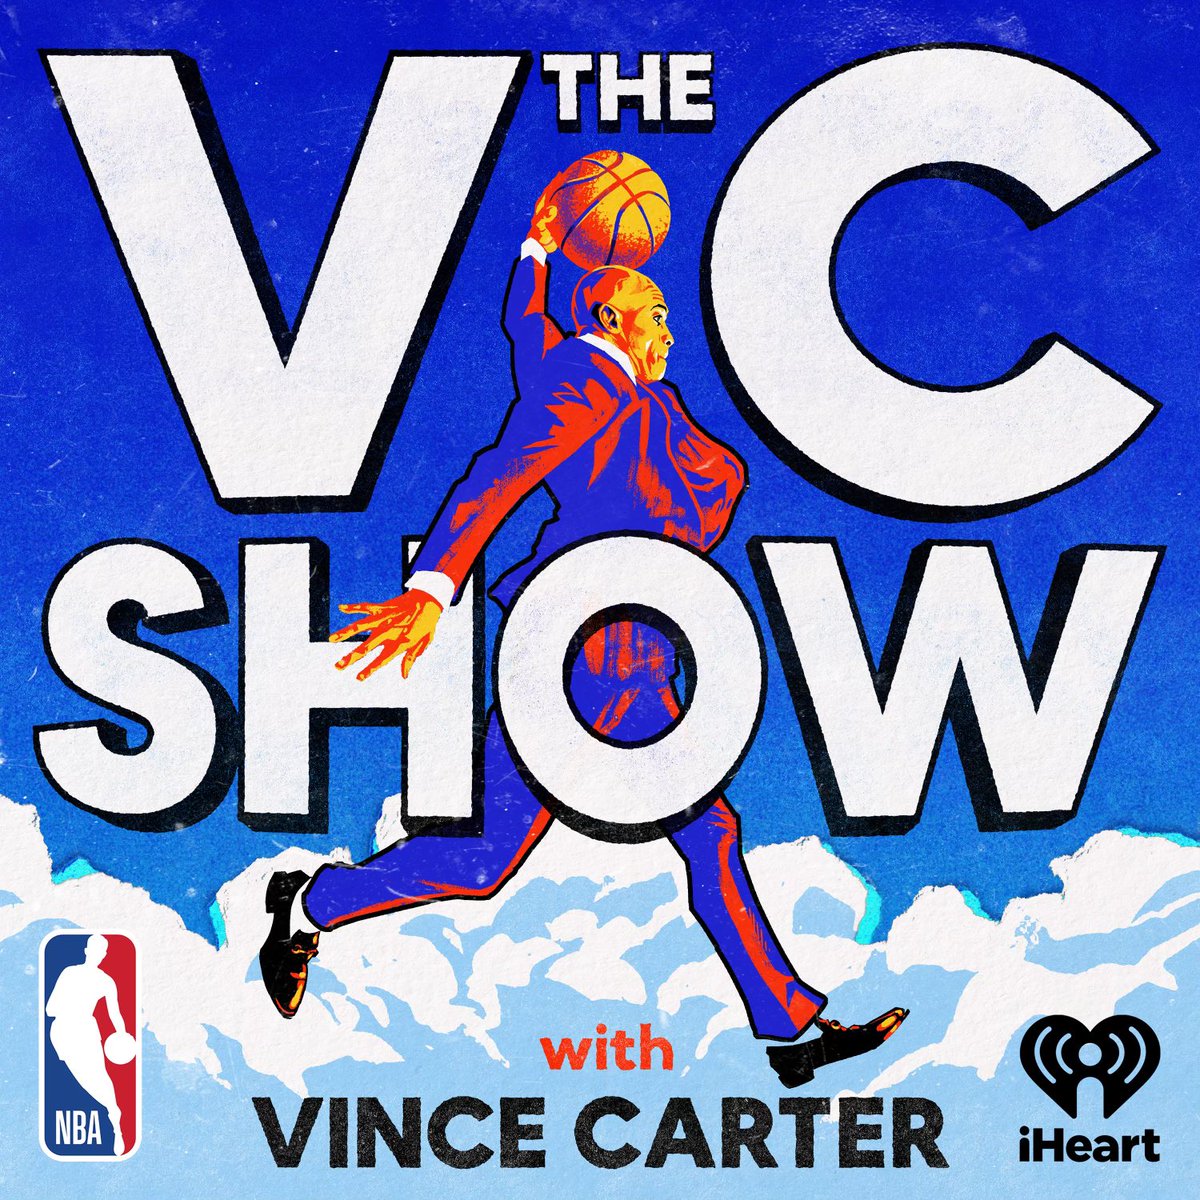 New episode out now Featuring @jameernelson 

link.chtbl.com/thevcshow

#TheVCShow
#KickYaFeetUp
#JameerNelson